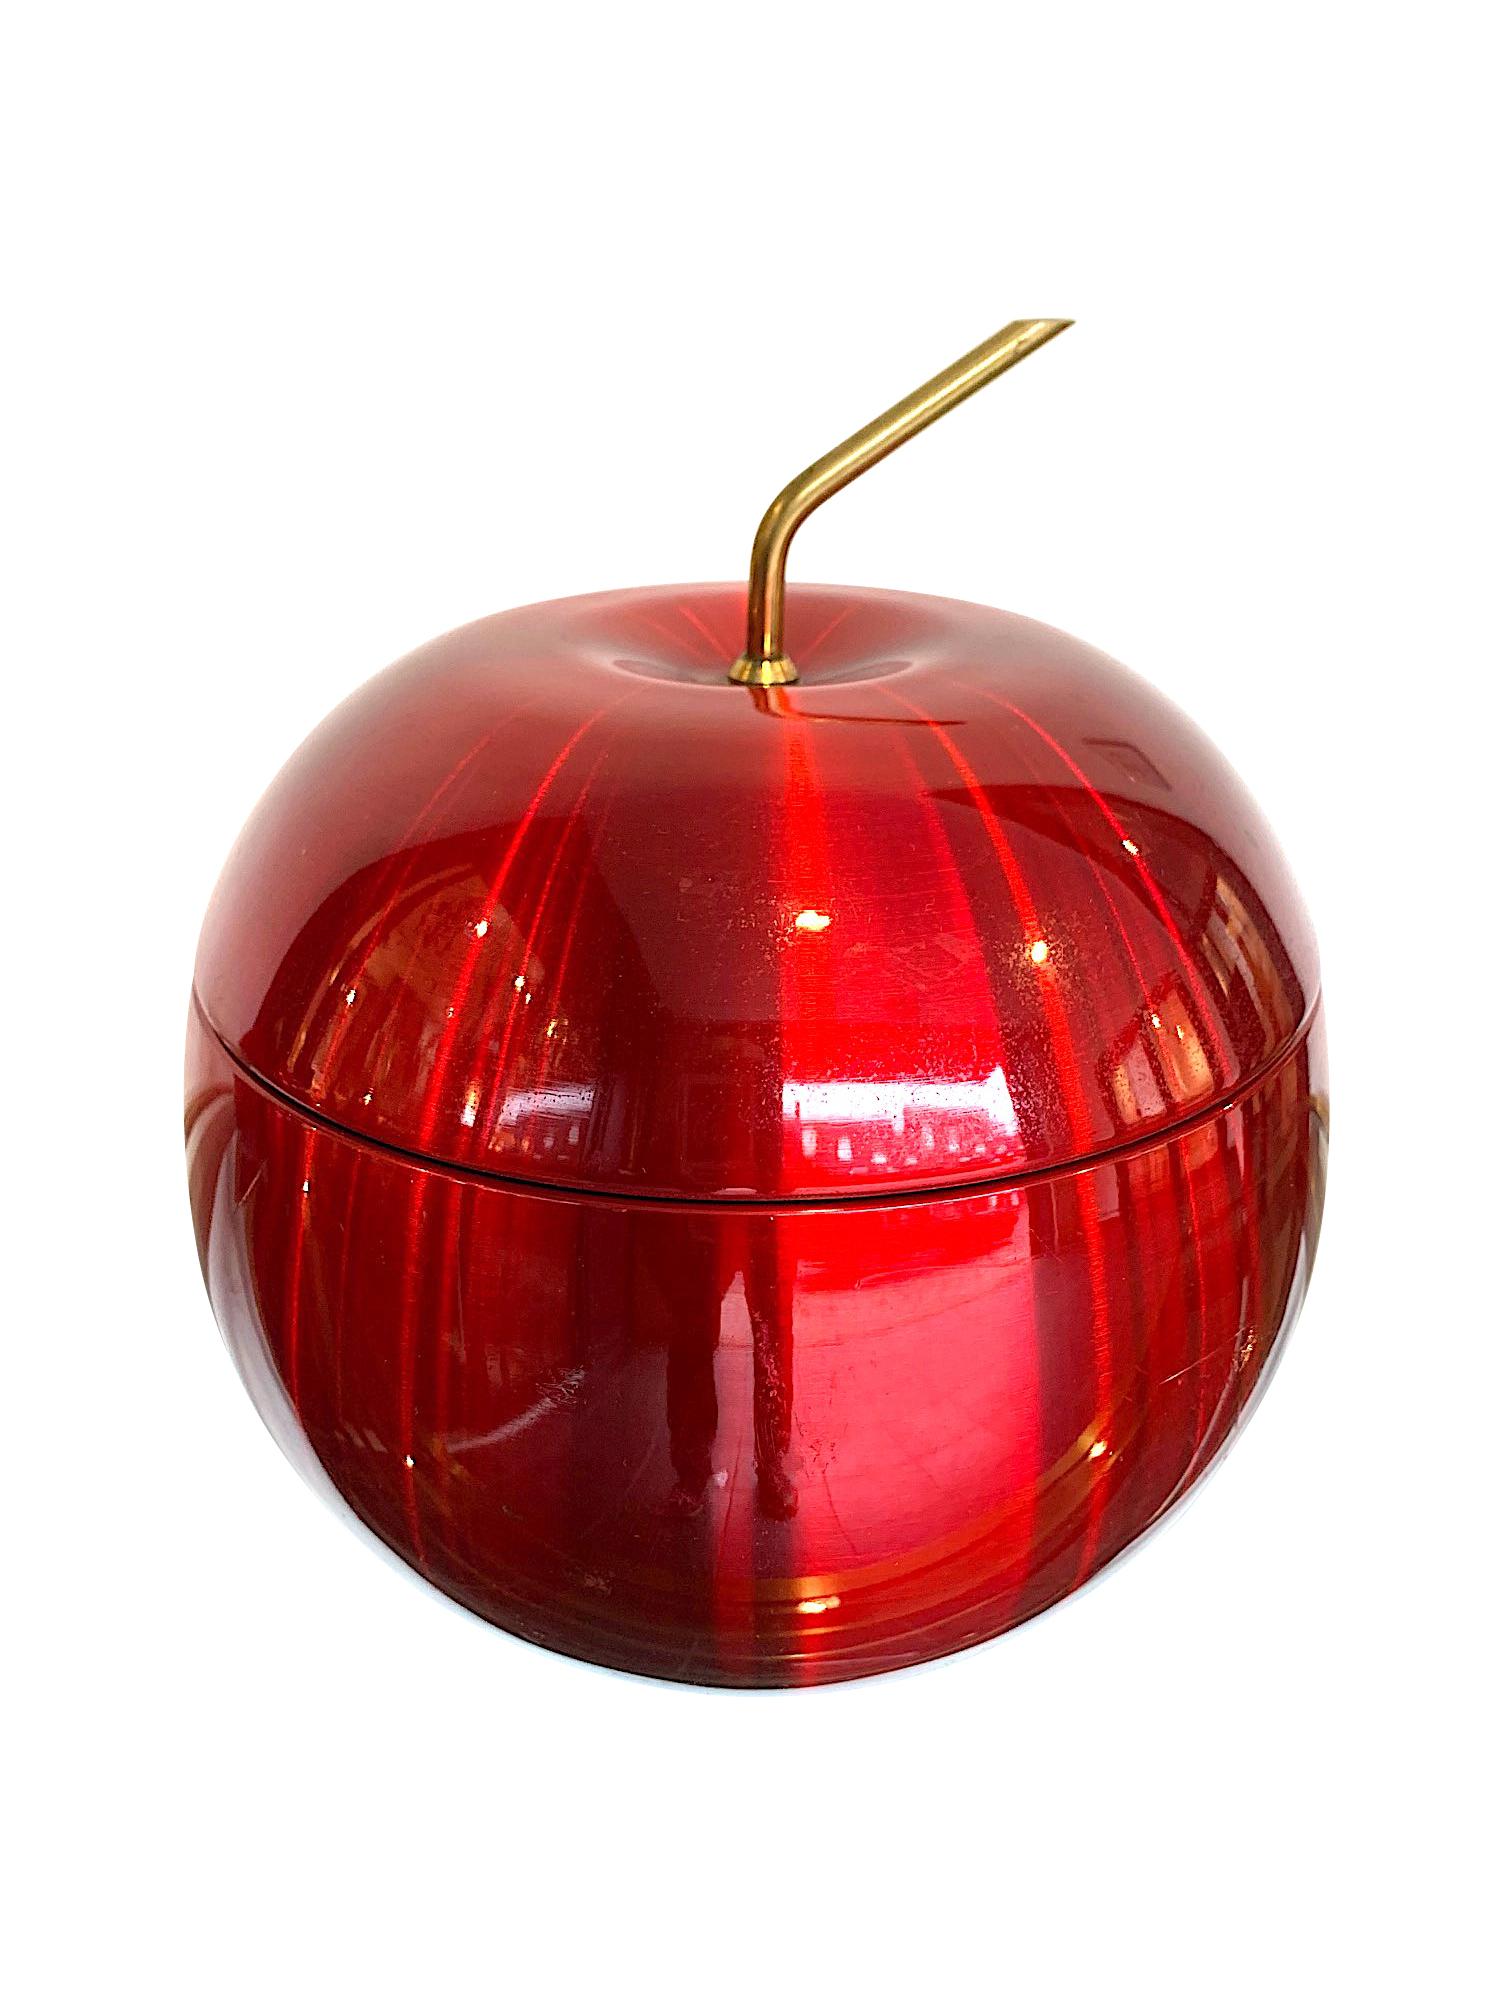 Late 20th Century 1970s Cherry Ice Bucket by Daydream in Anodised Vibrant Red with Brass Handle